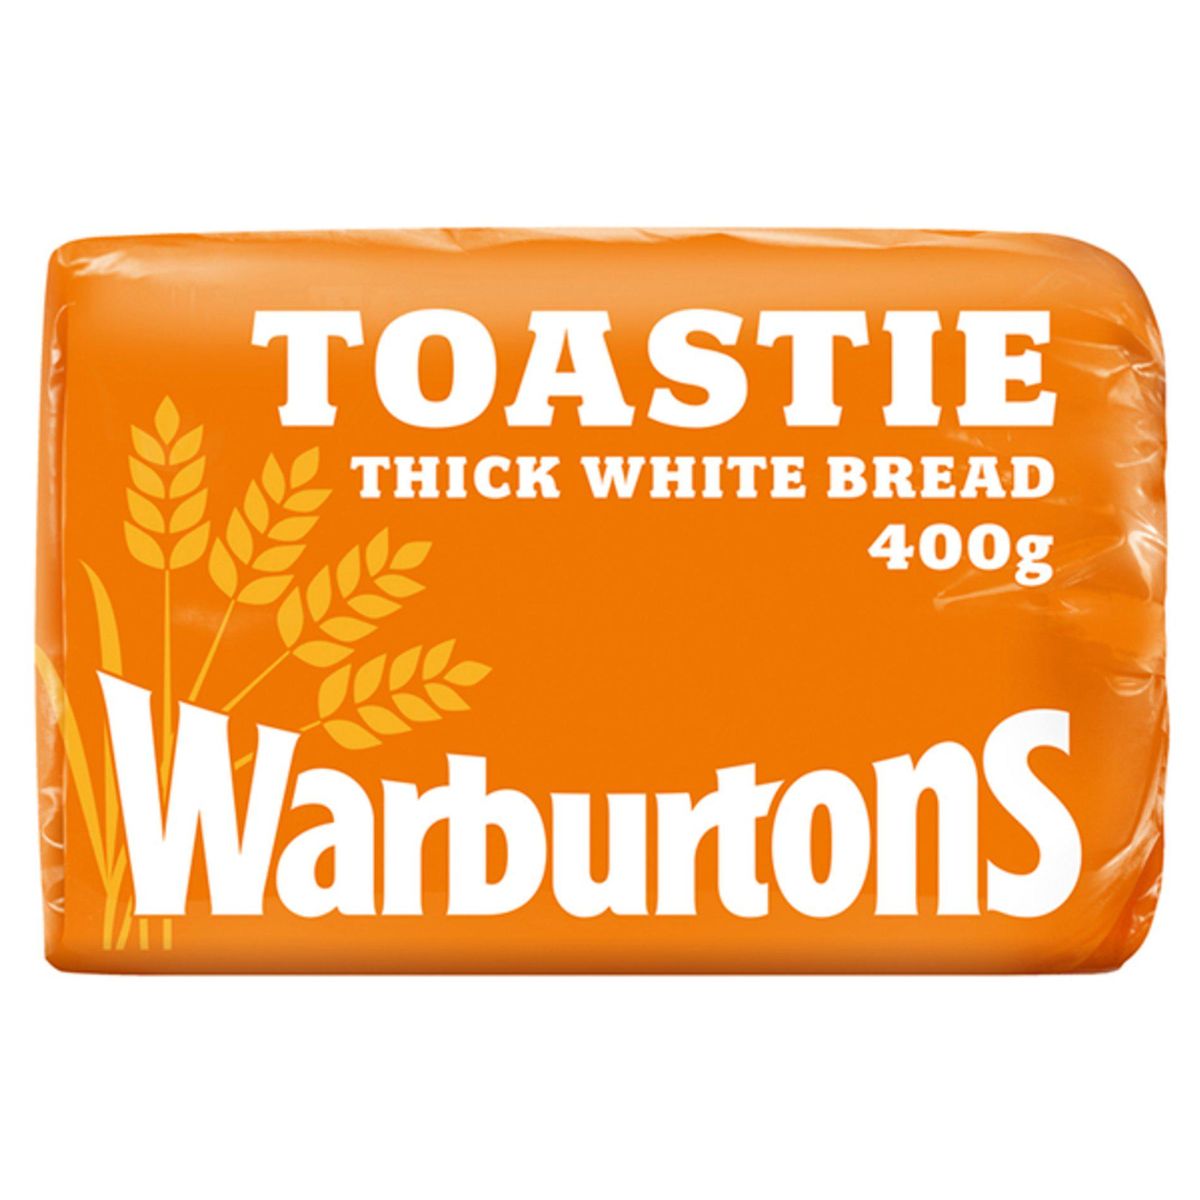 Packaging of Warburtons - Toastie Thick Sliced Soft White Bread - 400g, featuring orange wrapping with brand name and wheat graphics.